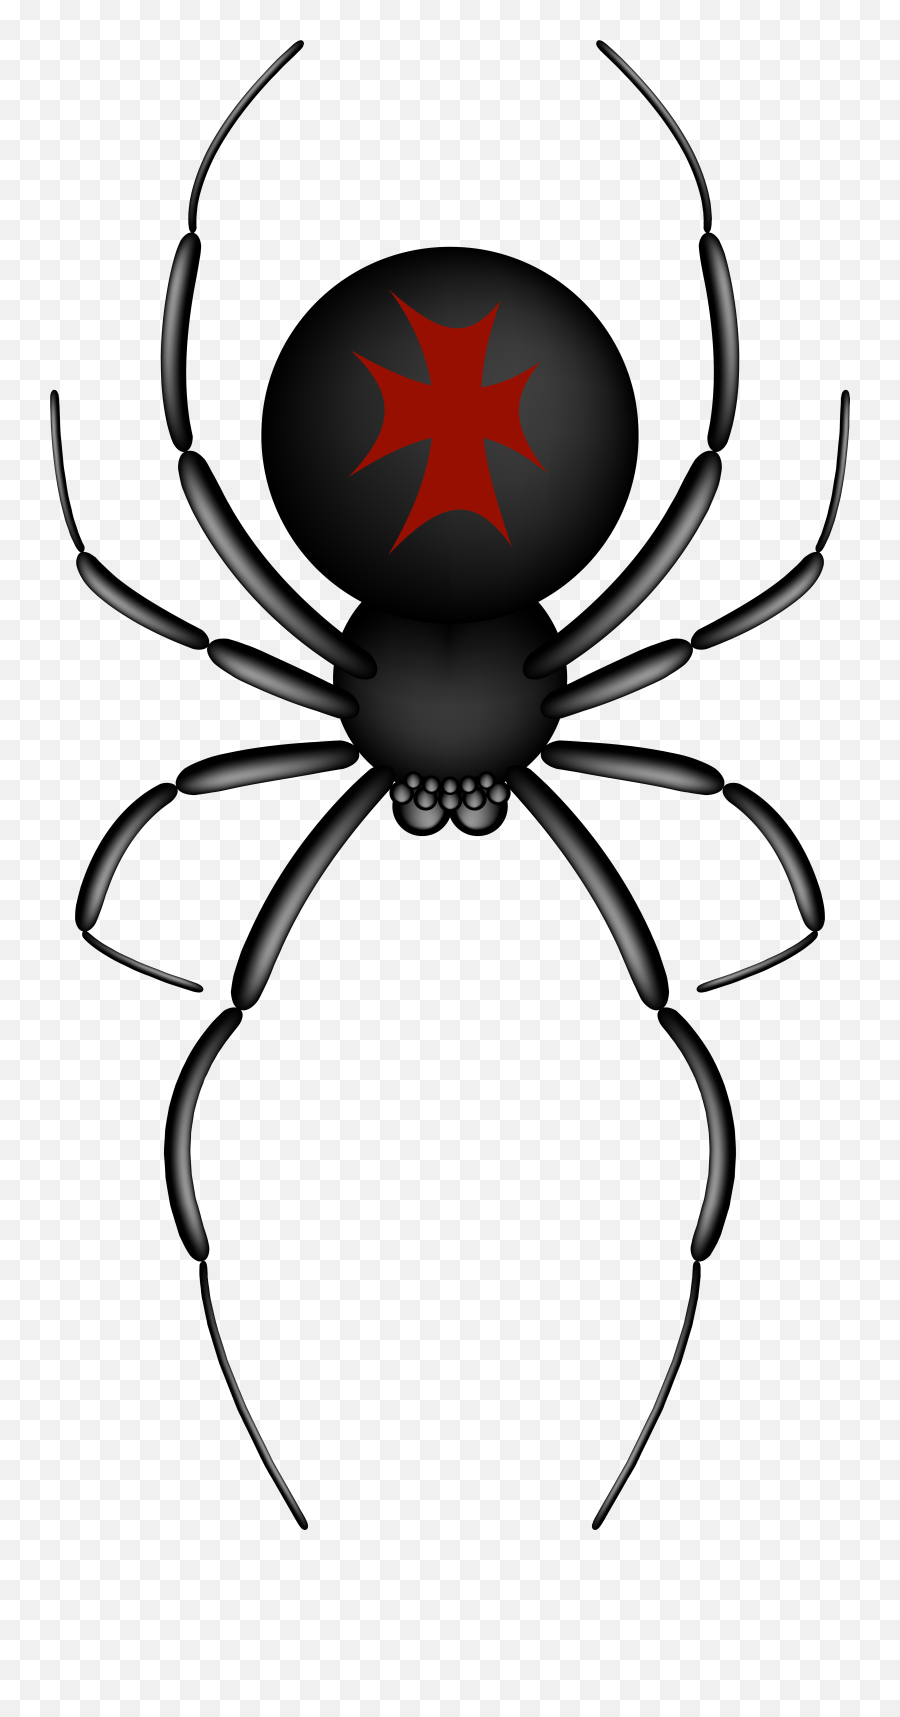 Insects U0026 Spiders Spider Web Clip Art - Spider Png Download Cartoon Transparent Background Cartoon Clip Art Spider Emoji,Spider Emoji